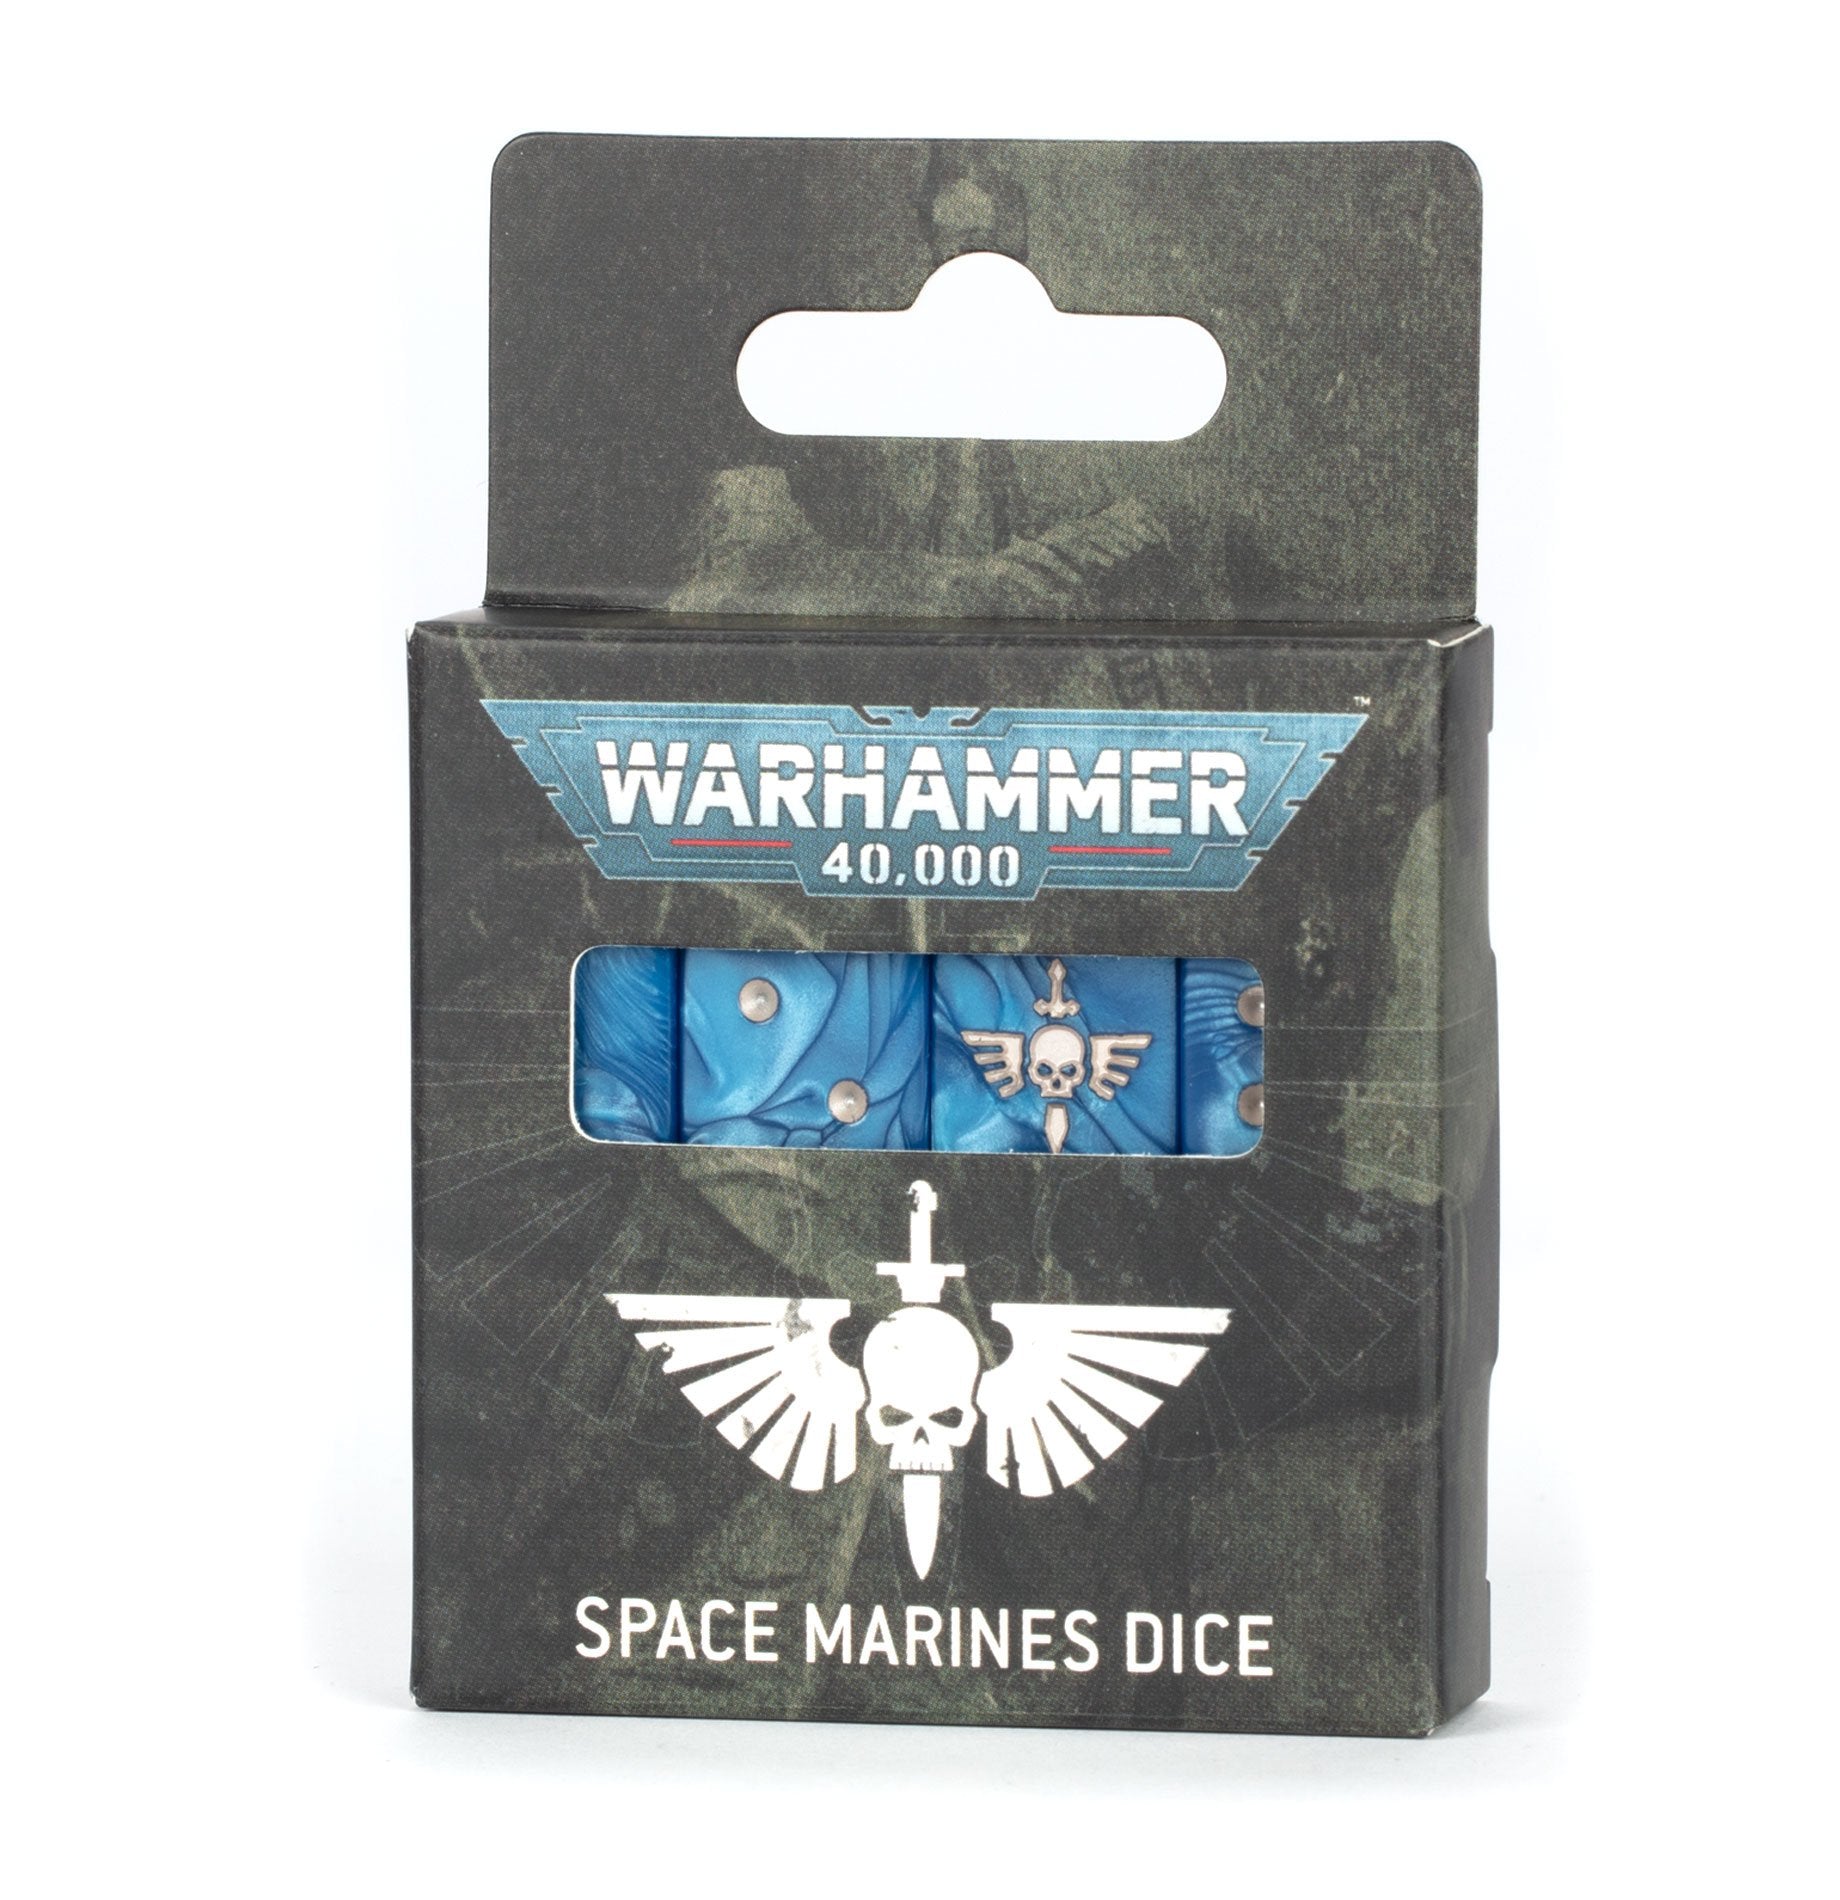 WH40K SPACE MARINES DICE | Impulse Games and Hobbies